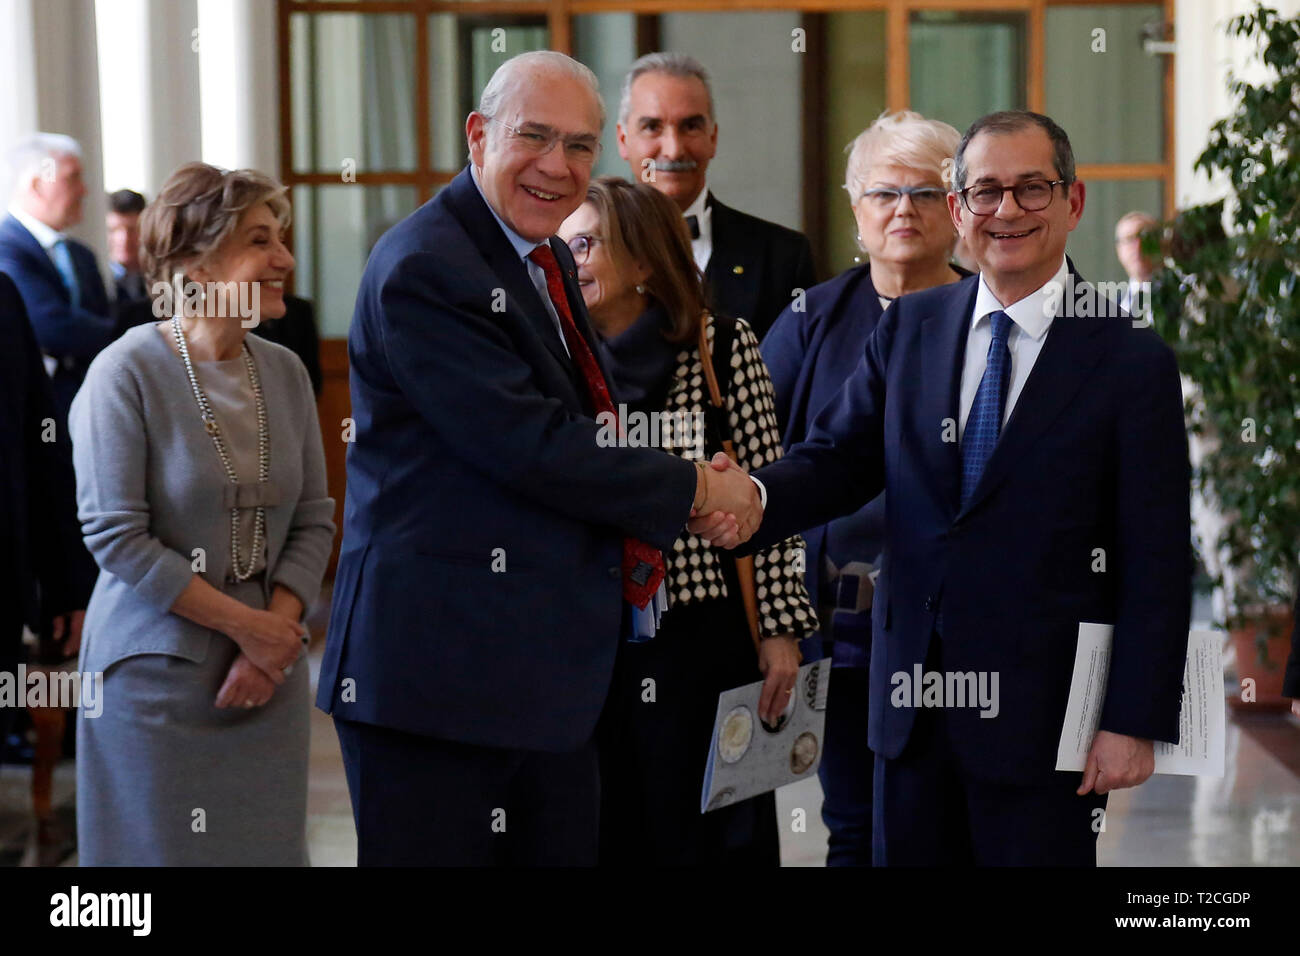 Rome, Italy. 01st Apr, 2019. Secretary General of OECD Angel Gurria and Italian Minister of Economy Giovanni Tria with their wives Rome April 1st 2019. Presentation of the OECD Report on Italy 2019. The report says after a modest recovery, the Italian economy is weakening. photo di Samantha Zucchi/Insidefoto Credit: insidefoto srl/Alamy Live News Stock Photo